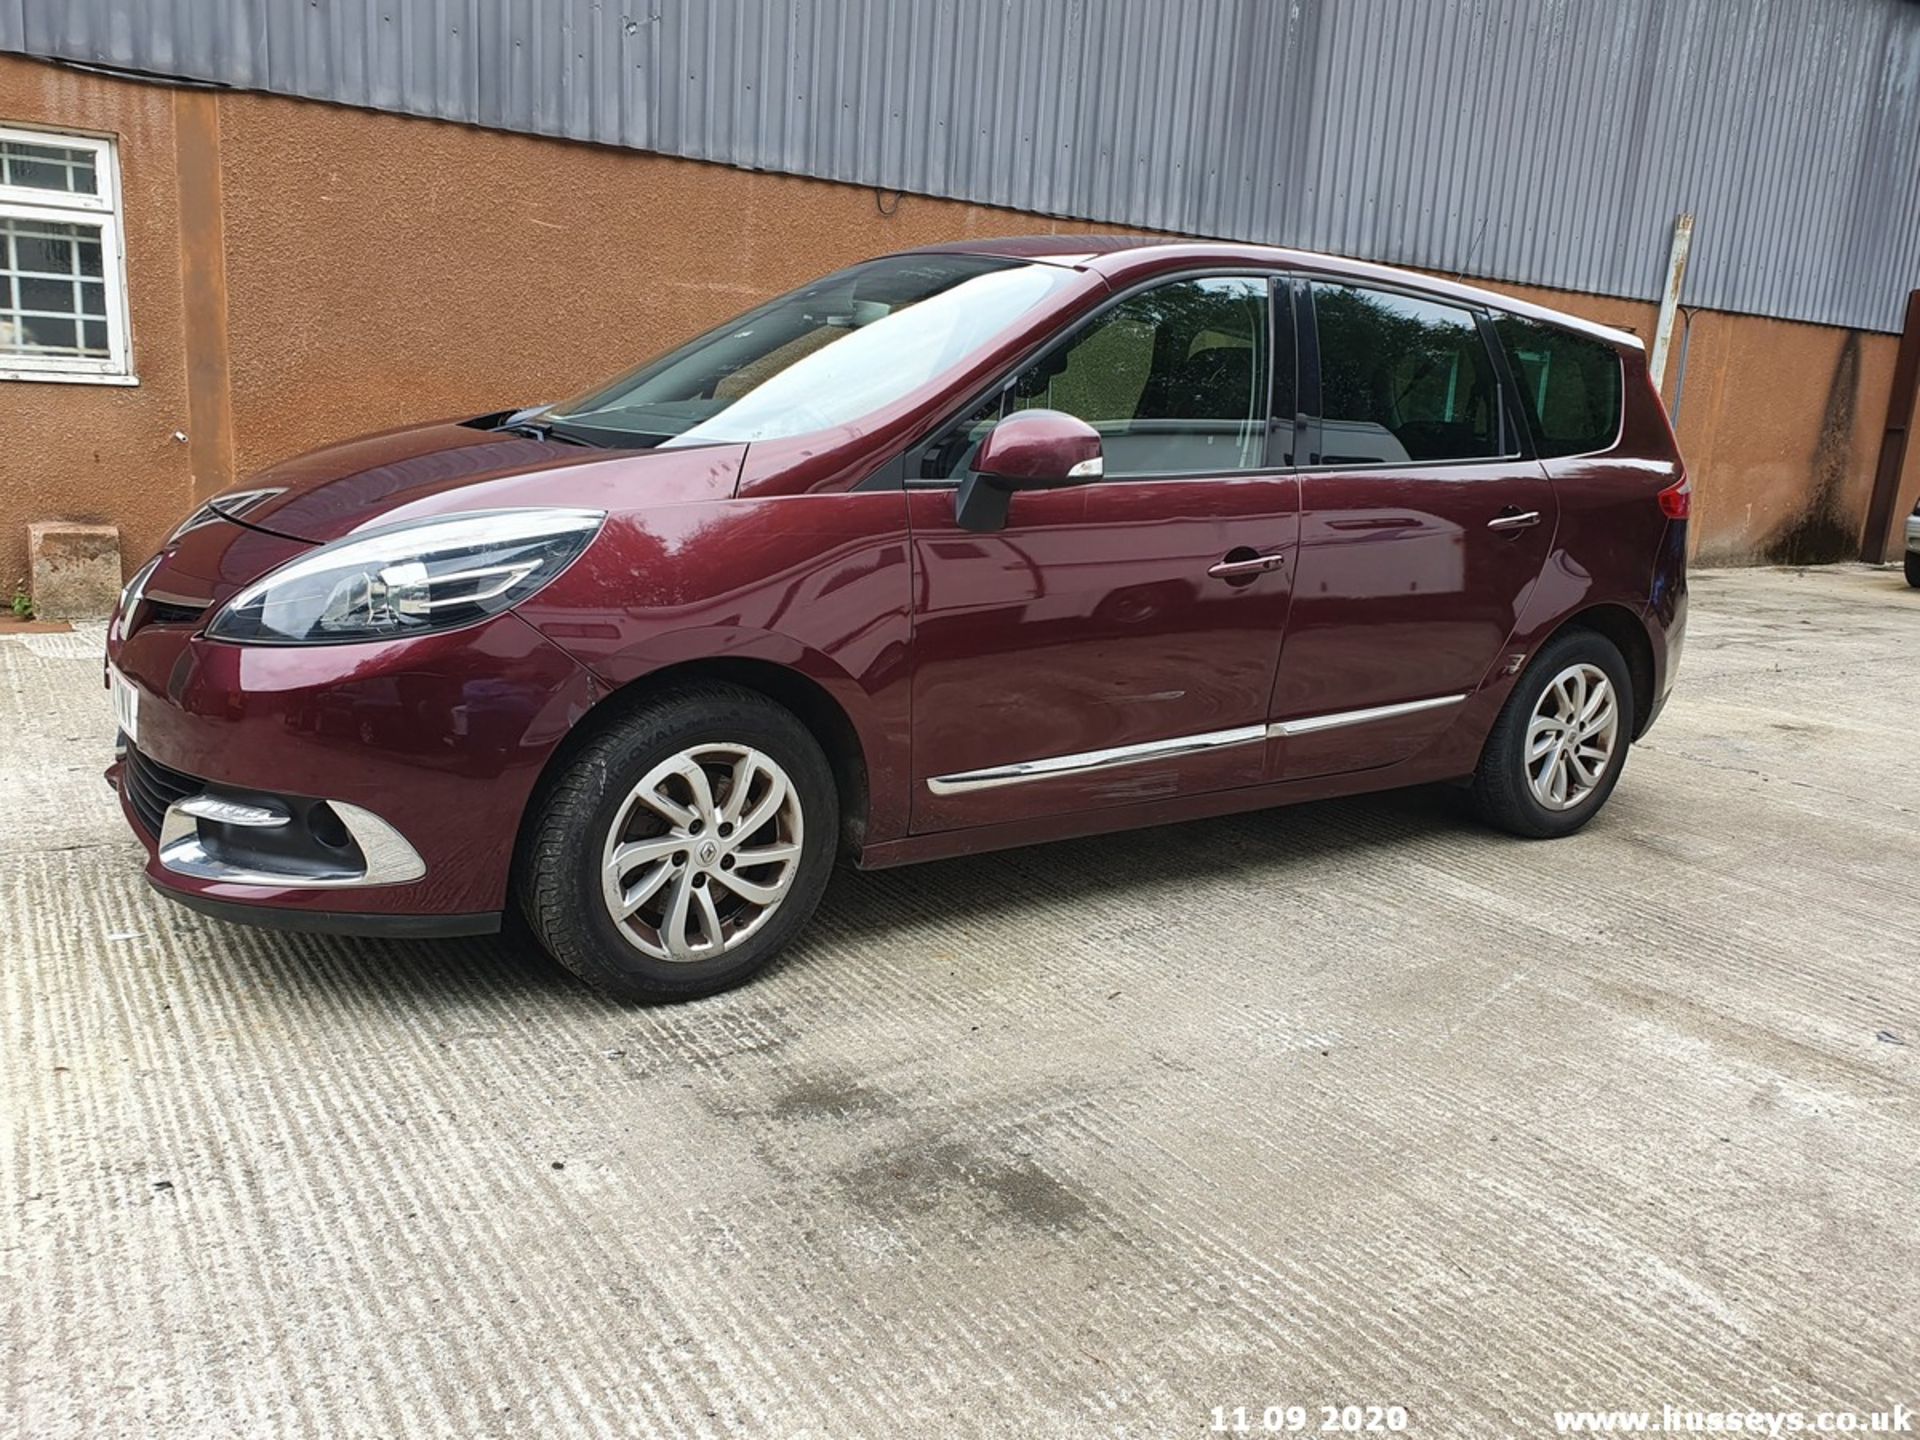 12/12 RENAULT G SCENIC D-QUE TT ENERGY - 1598cc 5dr MPV (Red, 129k) - Image 7 of 14